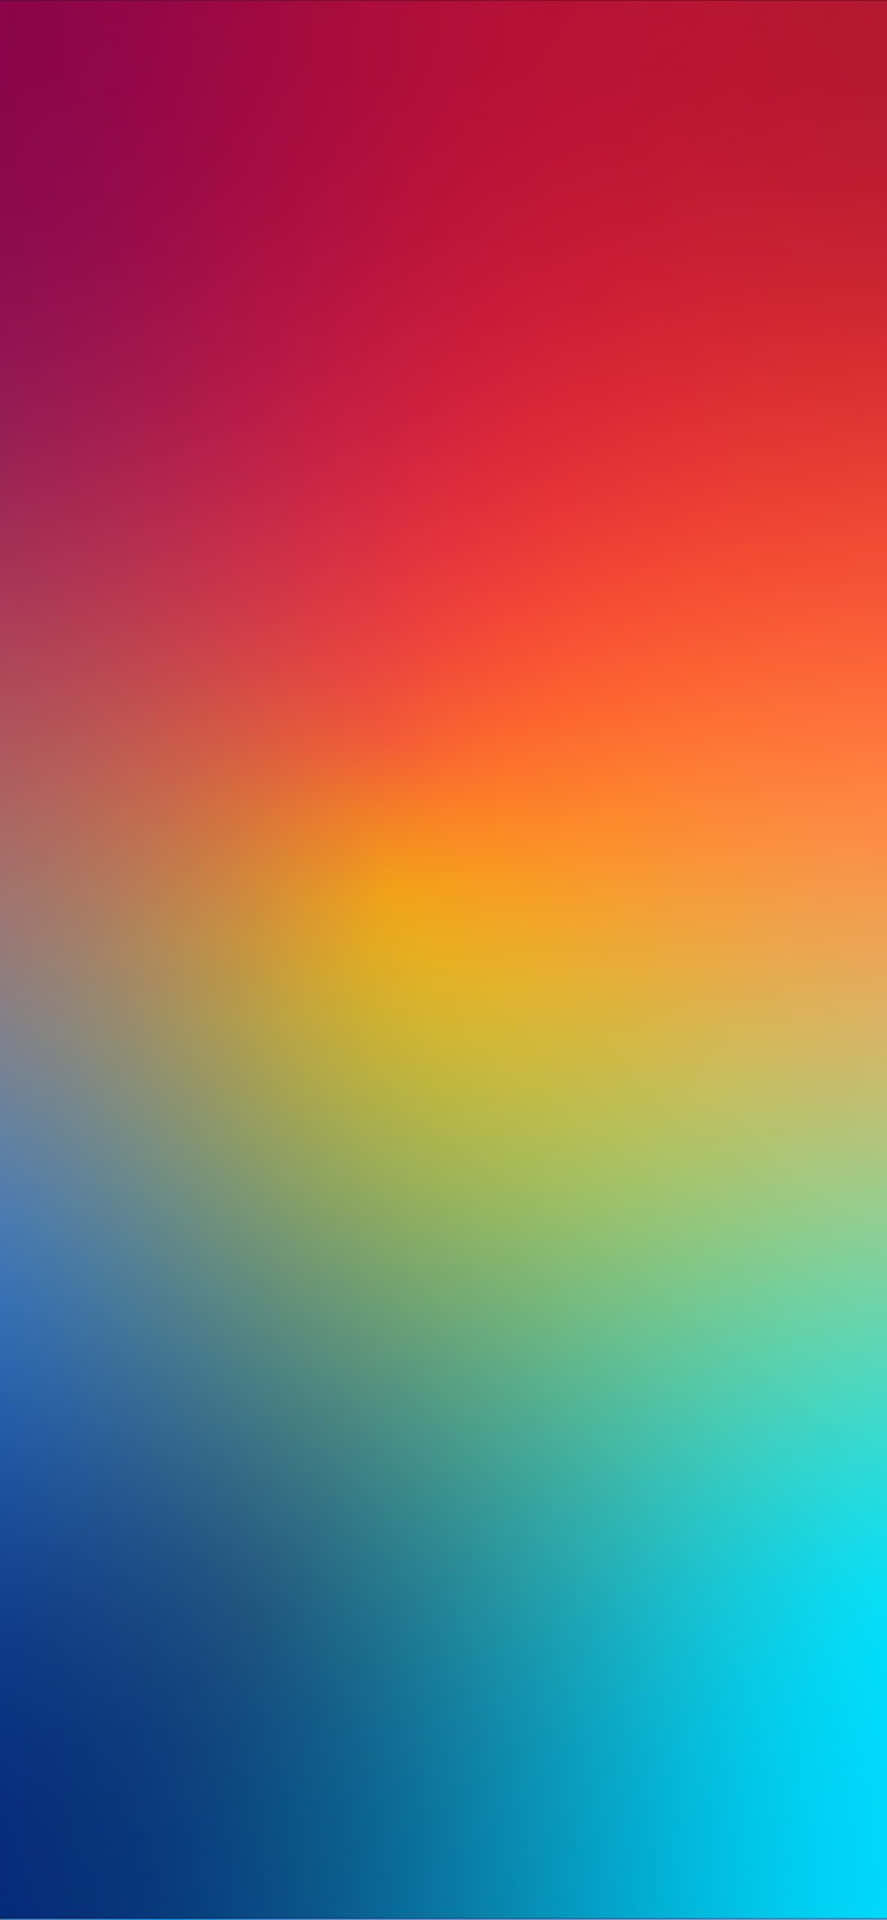 A Colorful Rainbow Background With A Gradient